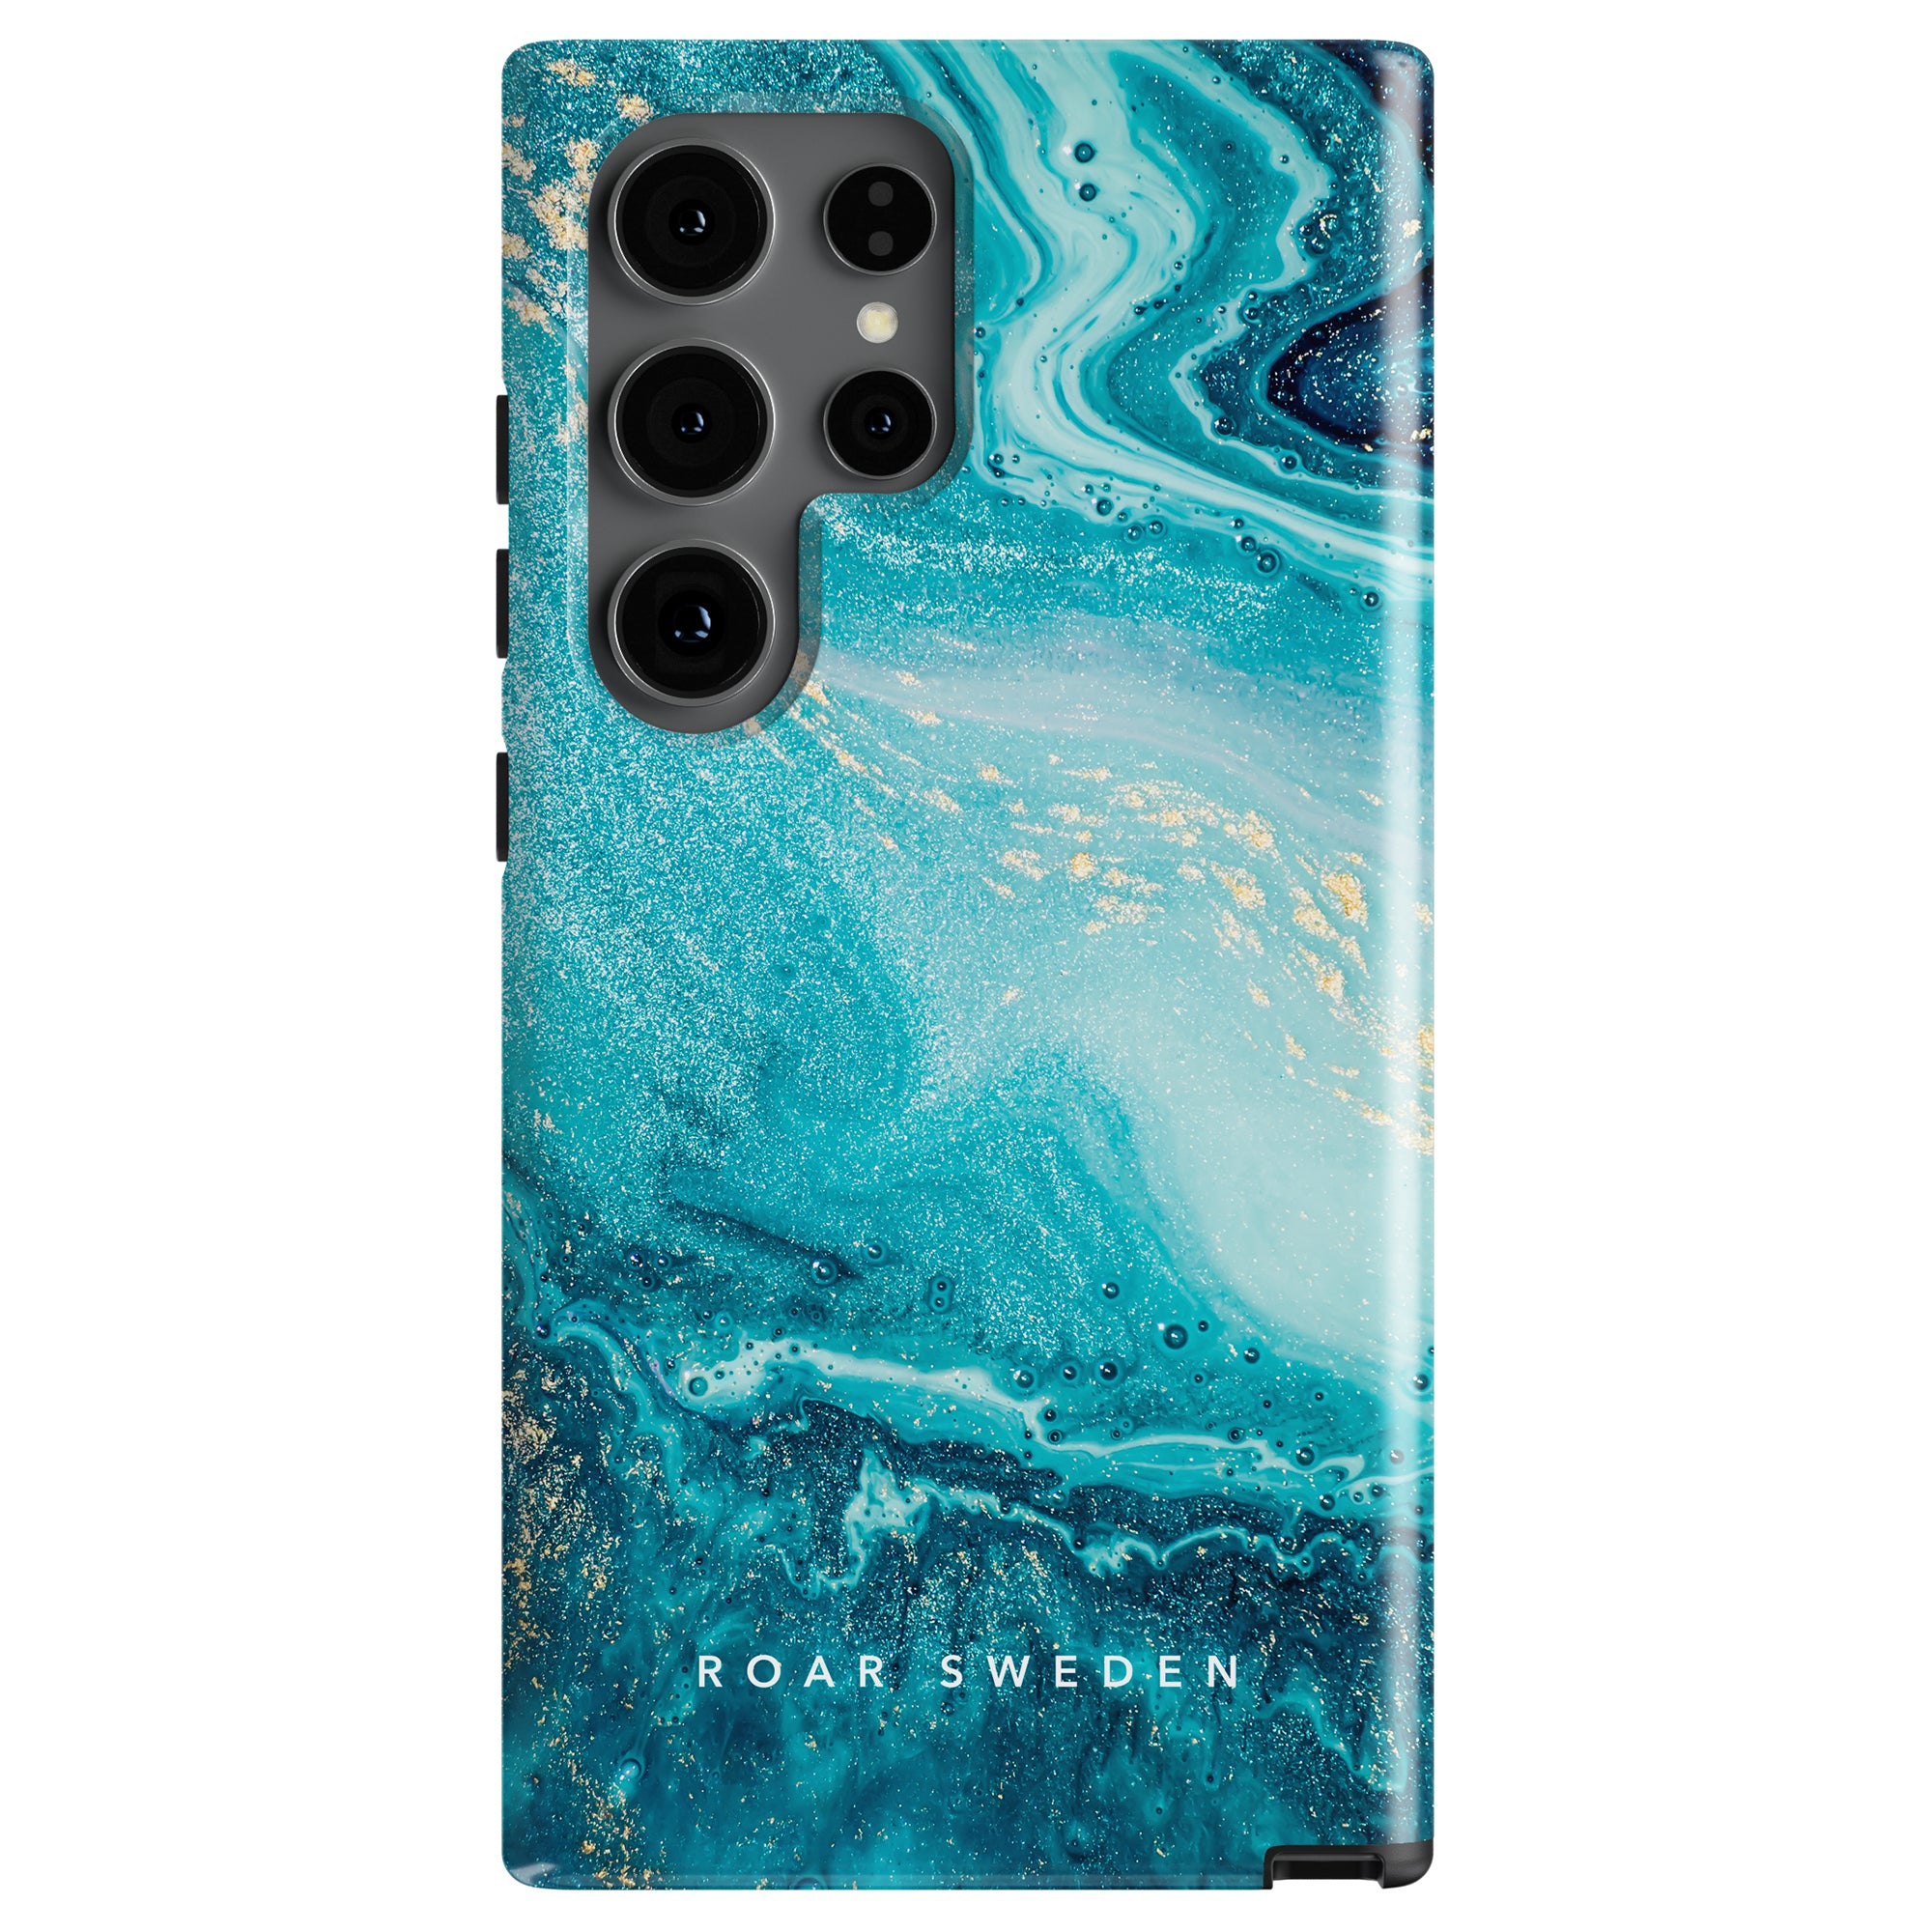 Phone case with a blue and turquoise marble design and "Roar Sweden" text at the bottom. The Pacific - Tough case features cutouts for the rear cameras and side buttons, offering both style and functionality.